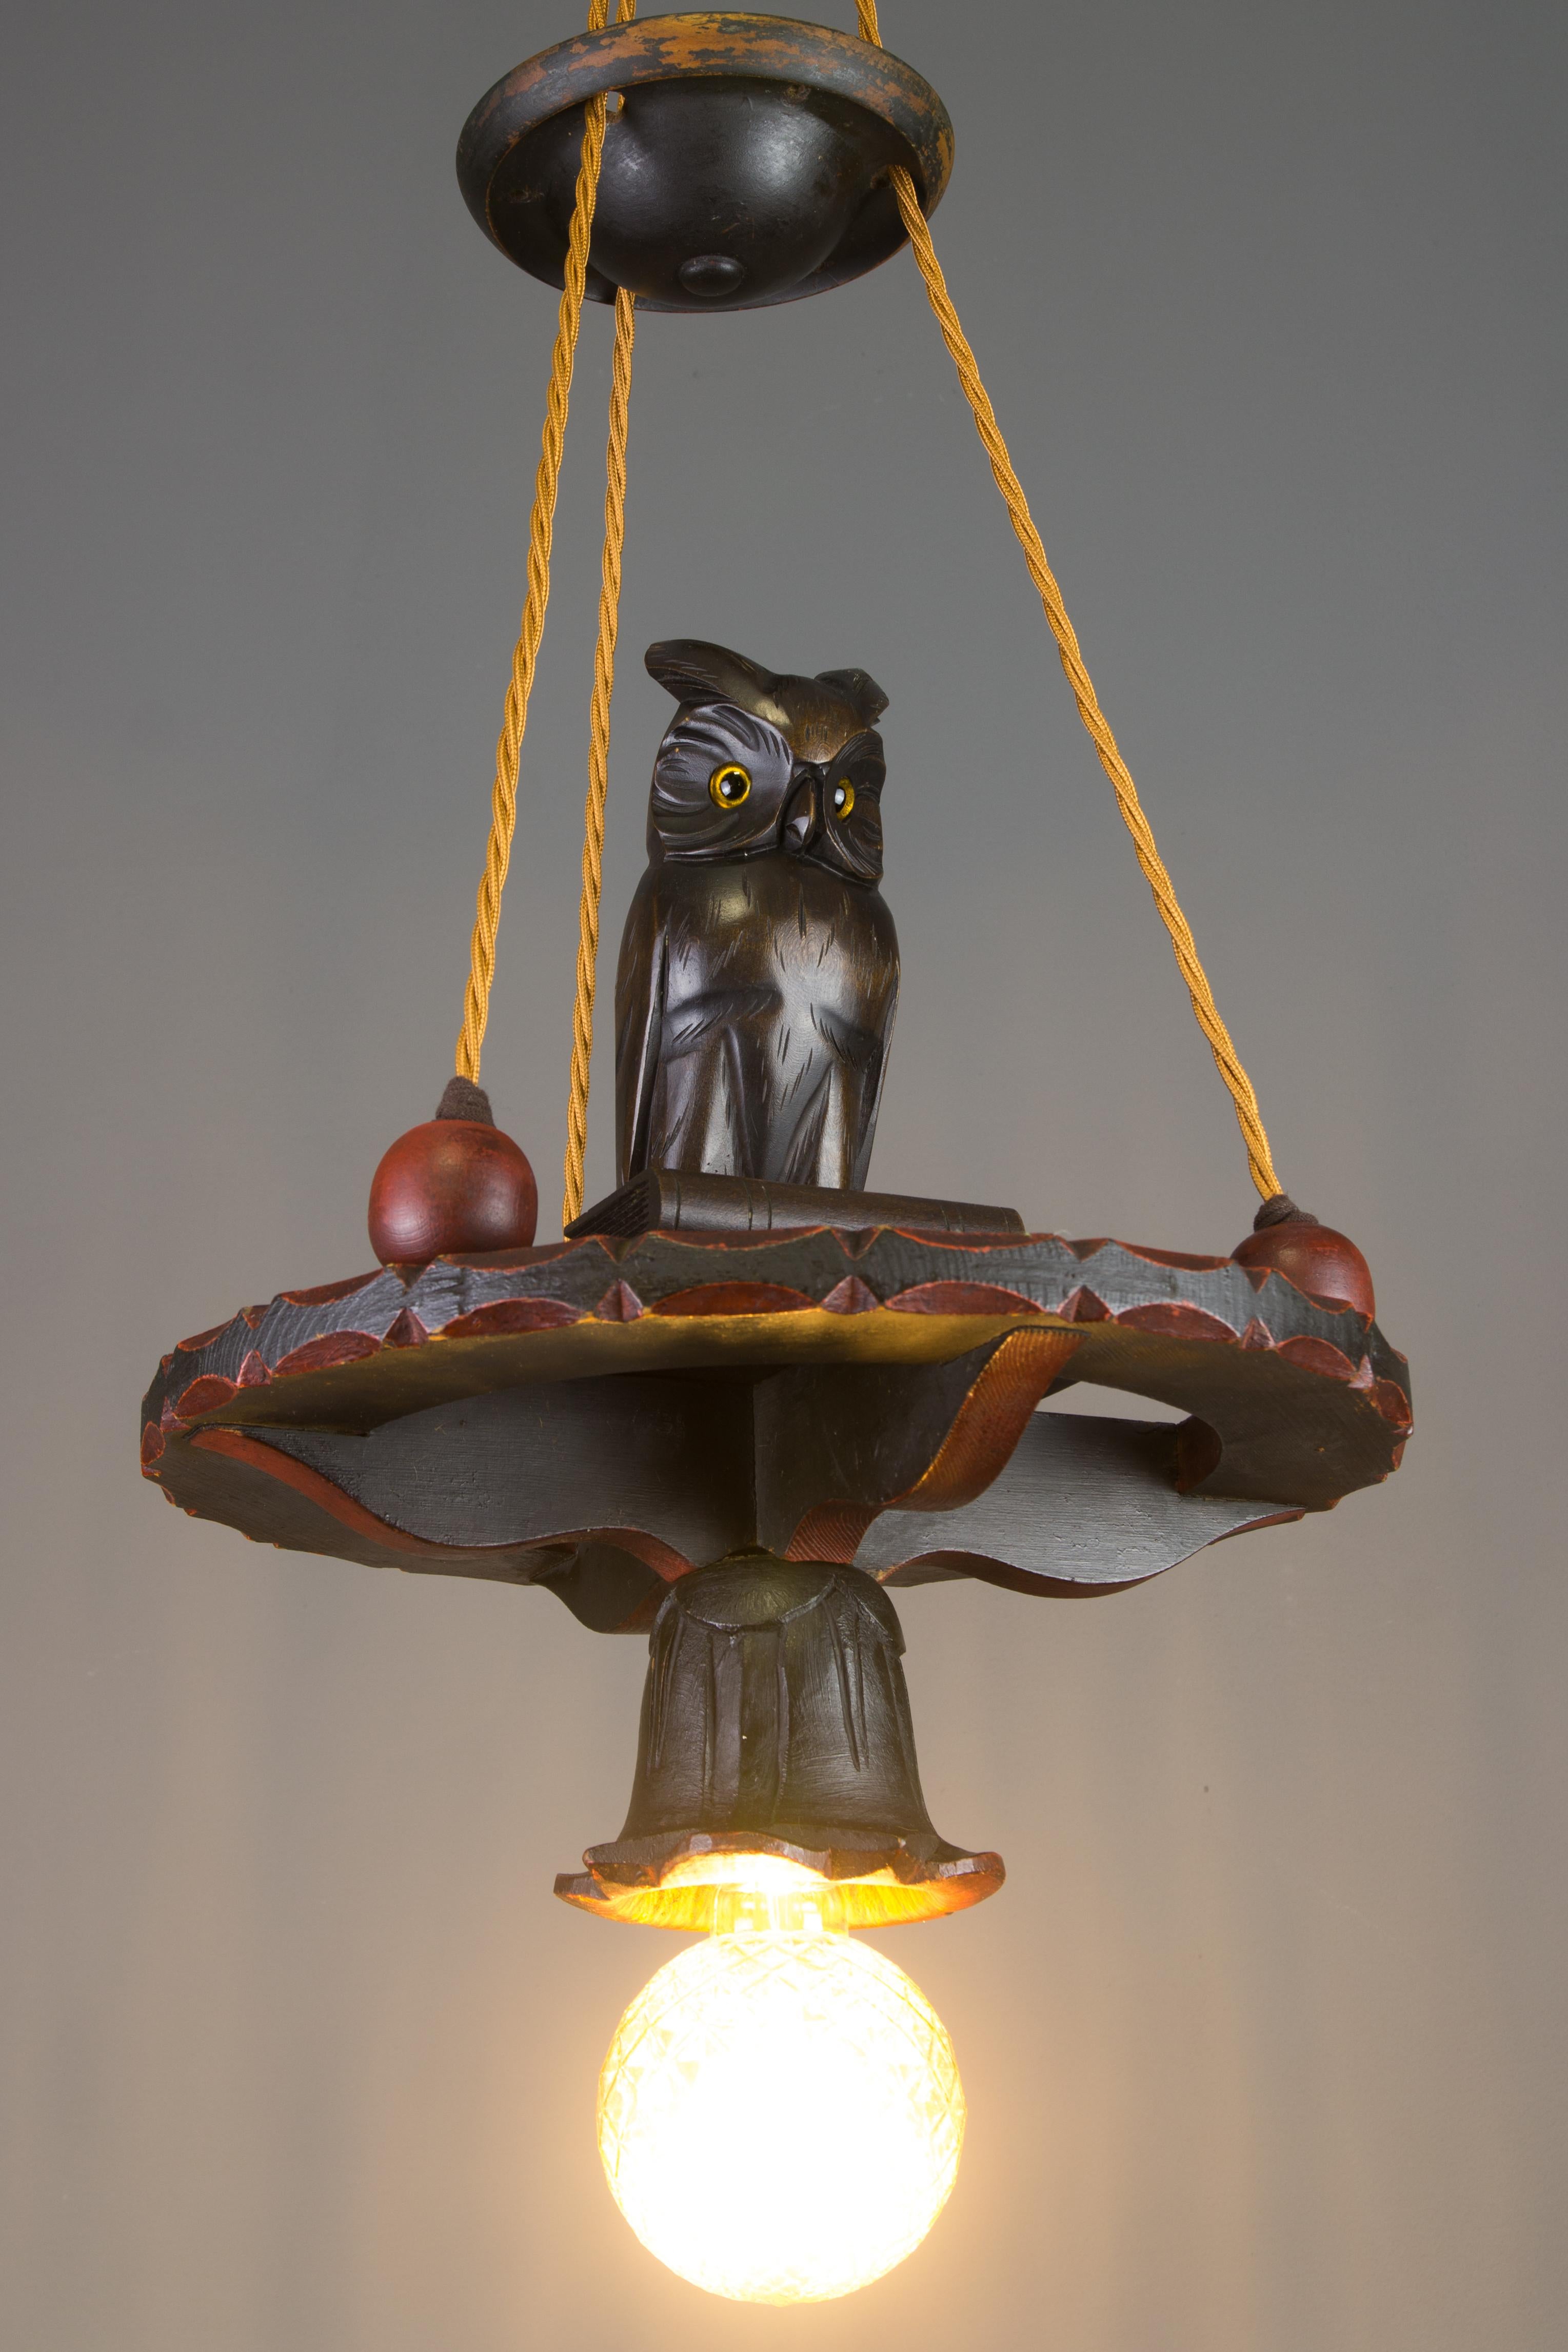 German Hand Carved Wooden Pendant Light Chandelier with Owl Sculpture, 1920s 13